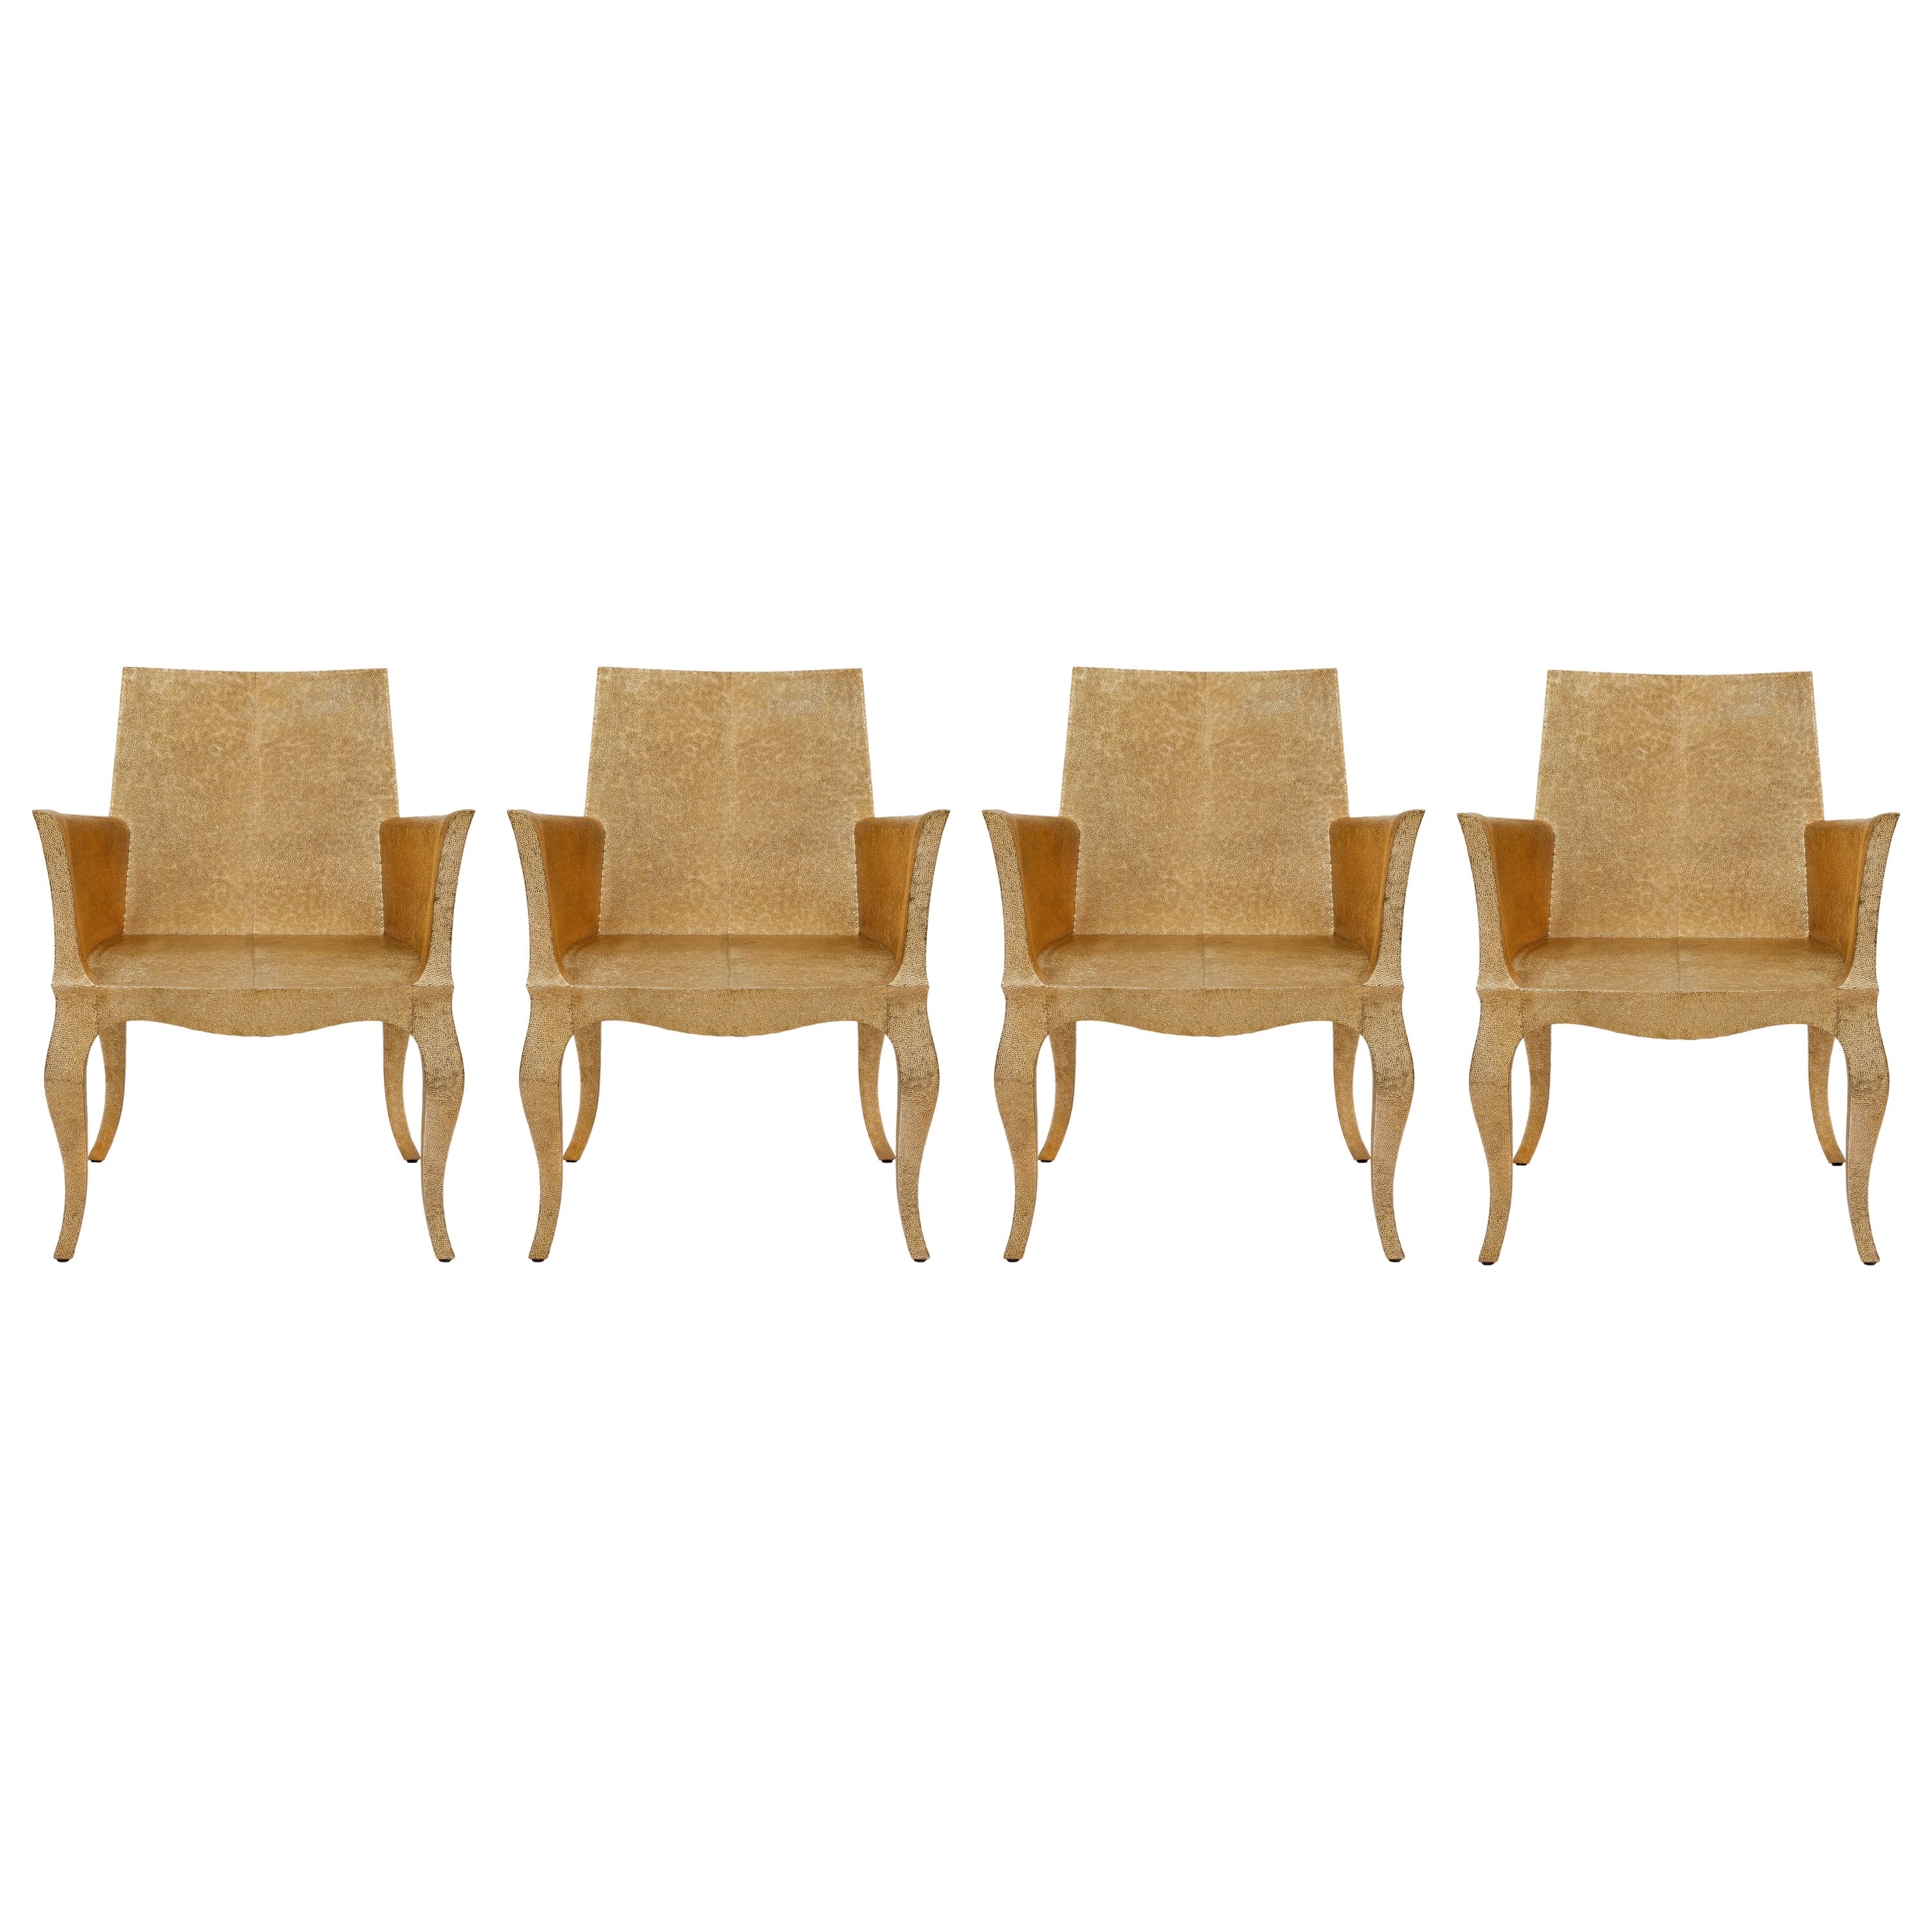 Set of Four Louise Club Chairs in Medium Hammered Brass Over Wood by P. Mathieu